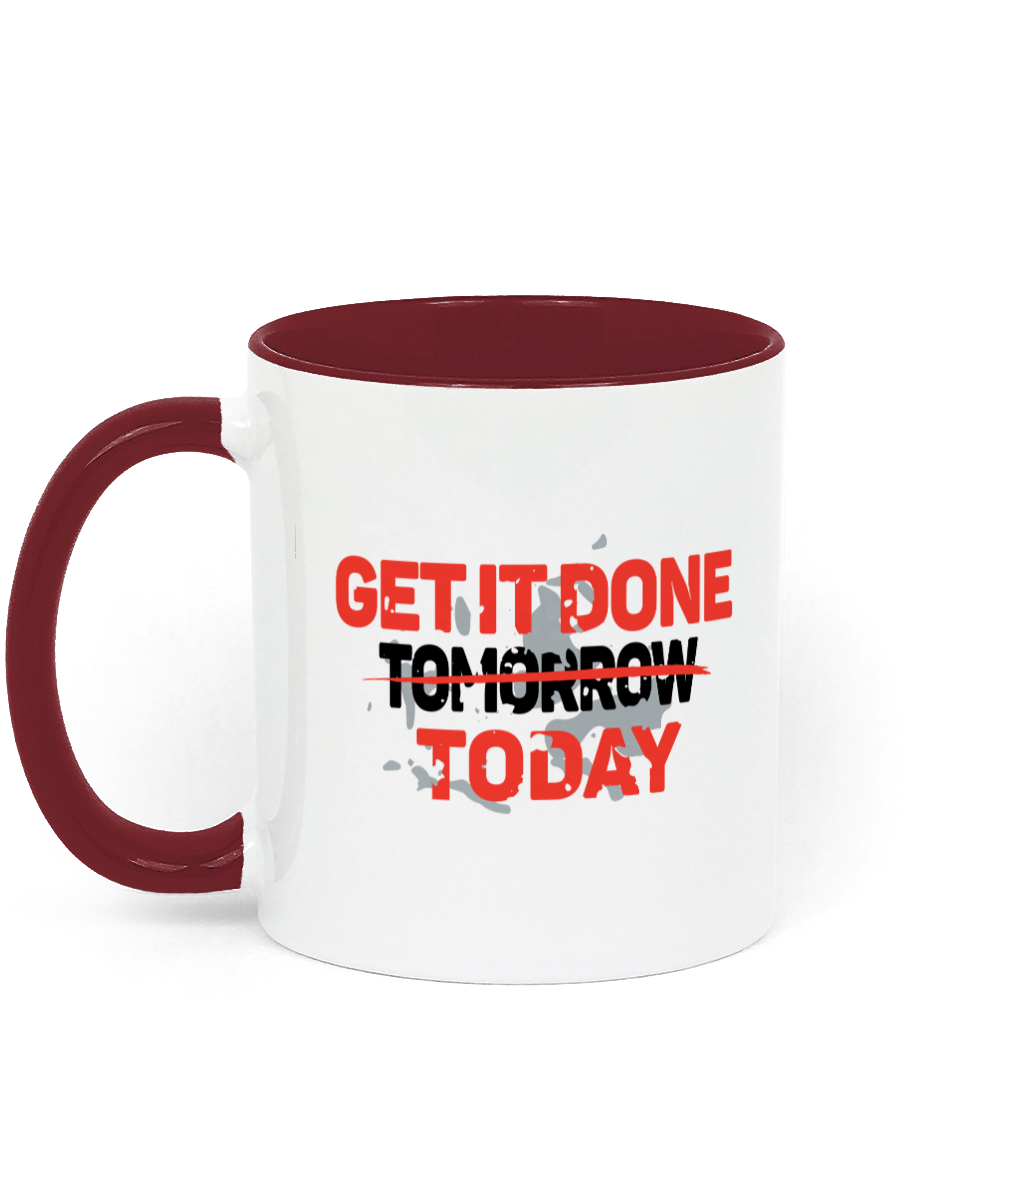 Get it done today 11 oz mug. Daily Affirmations, Motivation, Inspiration, Productivity, Achieving Goals. Perfect Gift. Two-toned. 